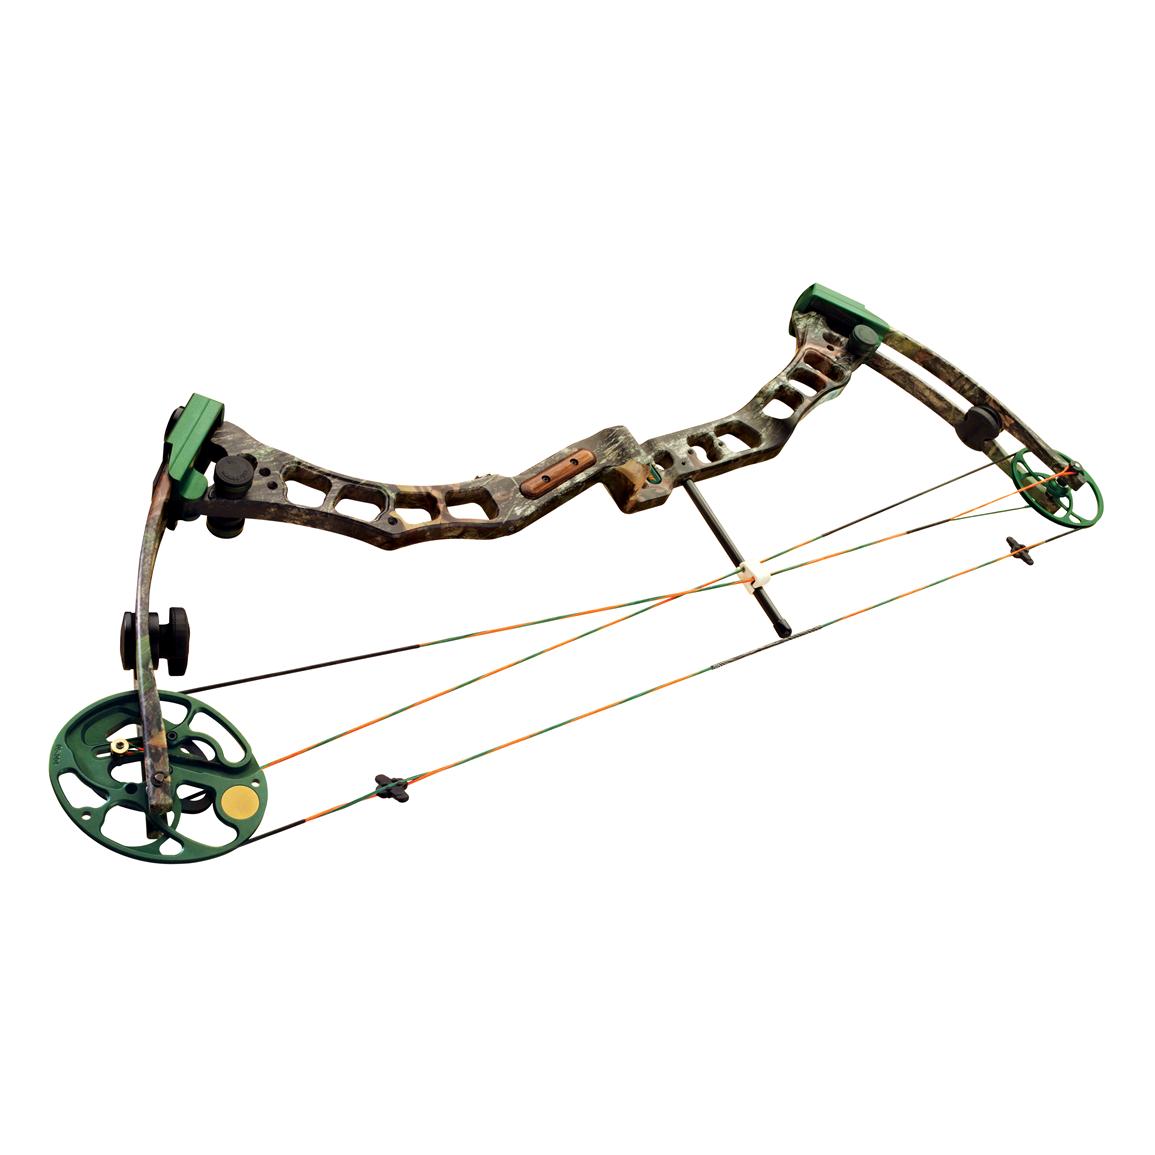 Fred Bear® Truth® Left Hand Compound Bow - 126472, Bows at Sportsman's